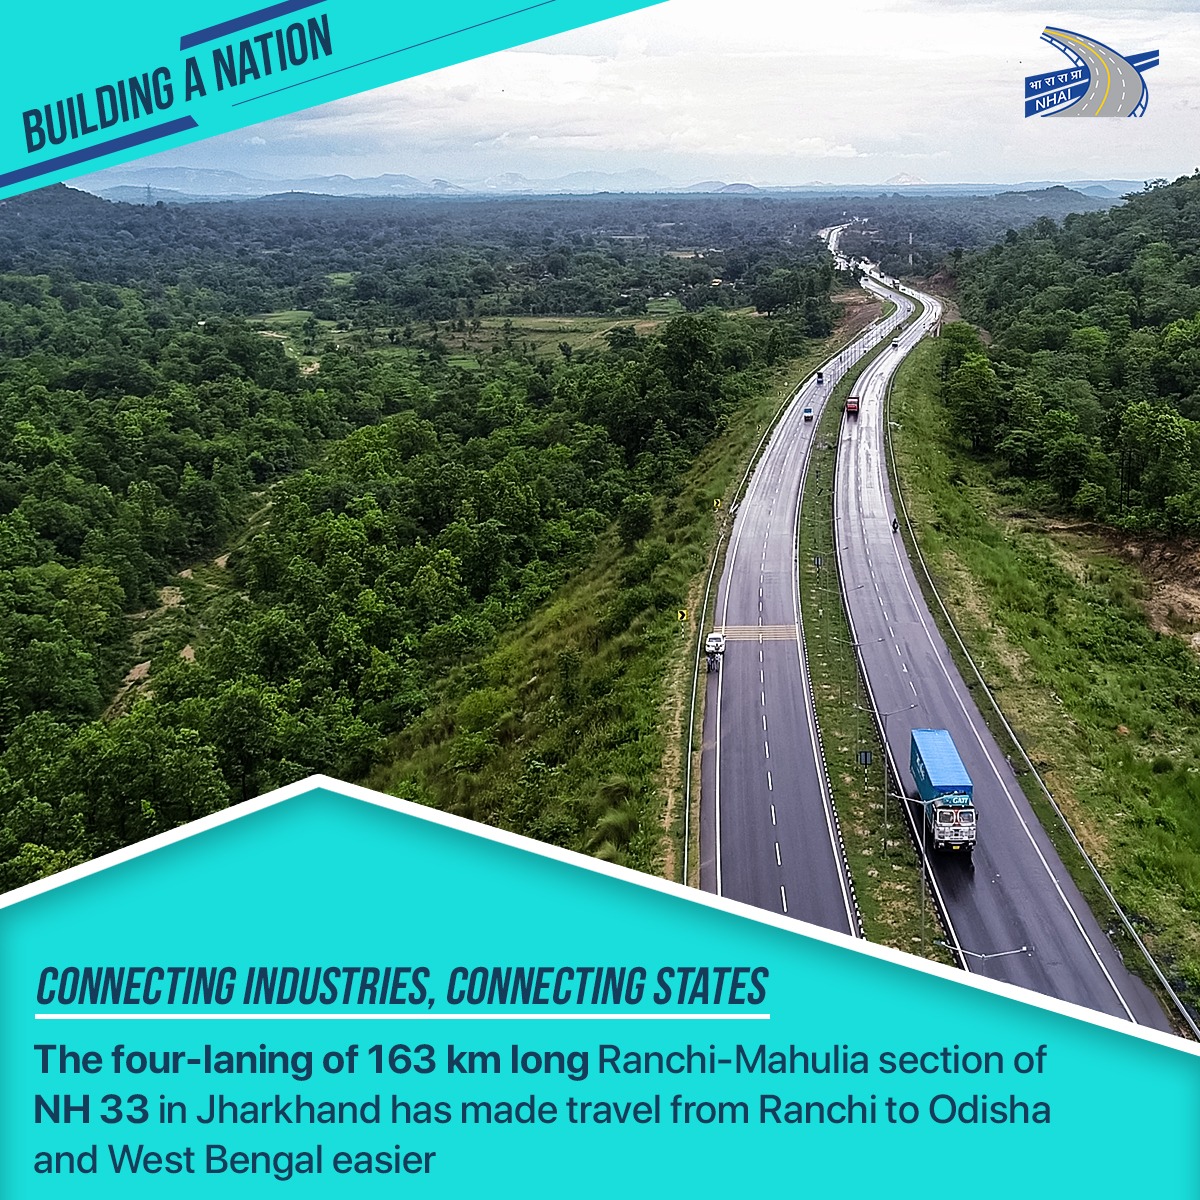 The 163 km long four-lane section from #Ranchi to #Mahulia on NH-33 has significantly cut travel time between Ranchi and #Jamshedpur. It also connects important commercial and industrial zones in #Odisha and #Jharkhand, boosting regional development. #NHAI #BuildingANation